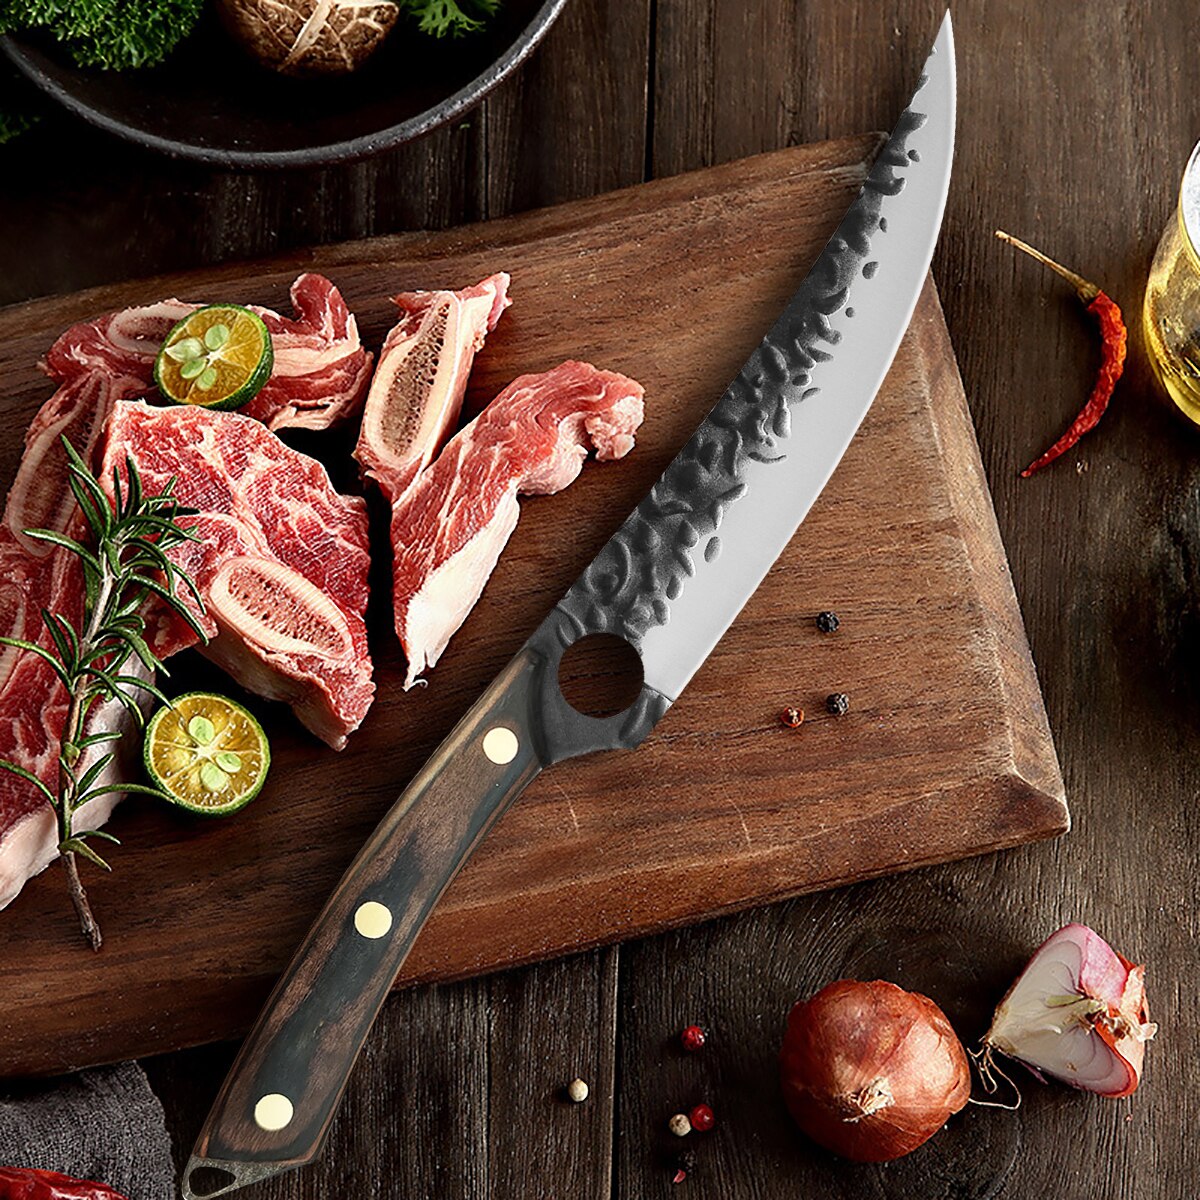 https://www.myjapanesehome.com/cdn/shop/products/Handmade-Forged-Boning-Knife-Stainless-Steel-Kitchen-Knife-Fish-Cleaver-Fruit-Vegetables-Cutting-Tool-Outdoor-Knife_c63de2ad-0f2e-4bb9-8a33-1447ed7cbf92.jpg?v=1686593790&width=1445